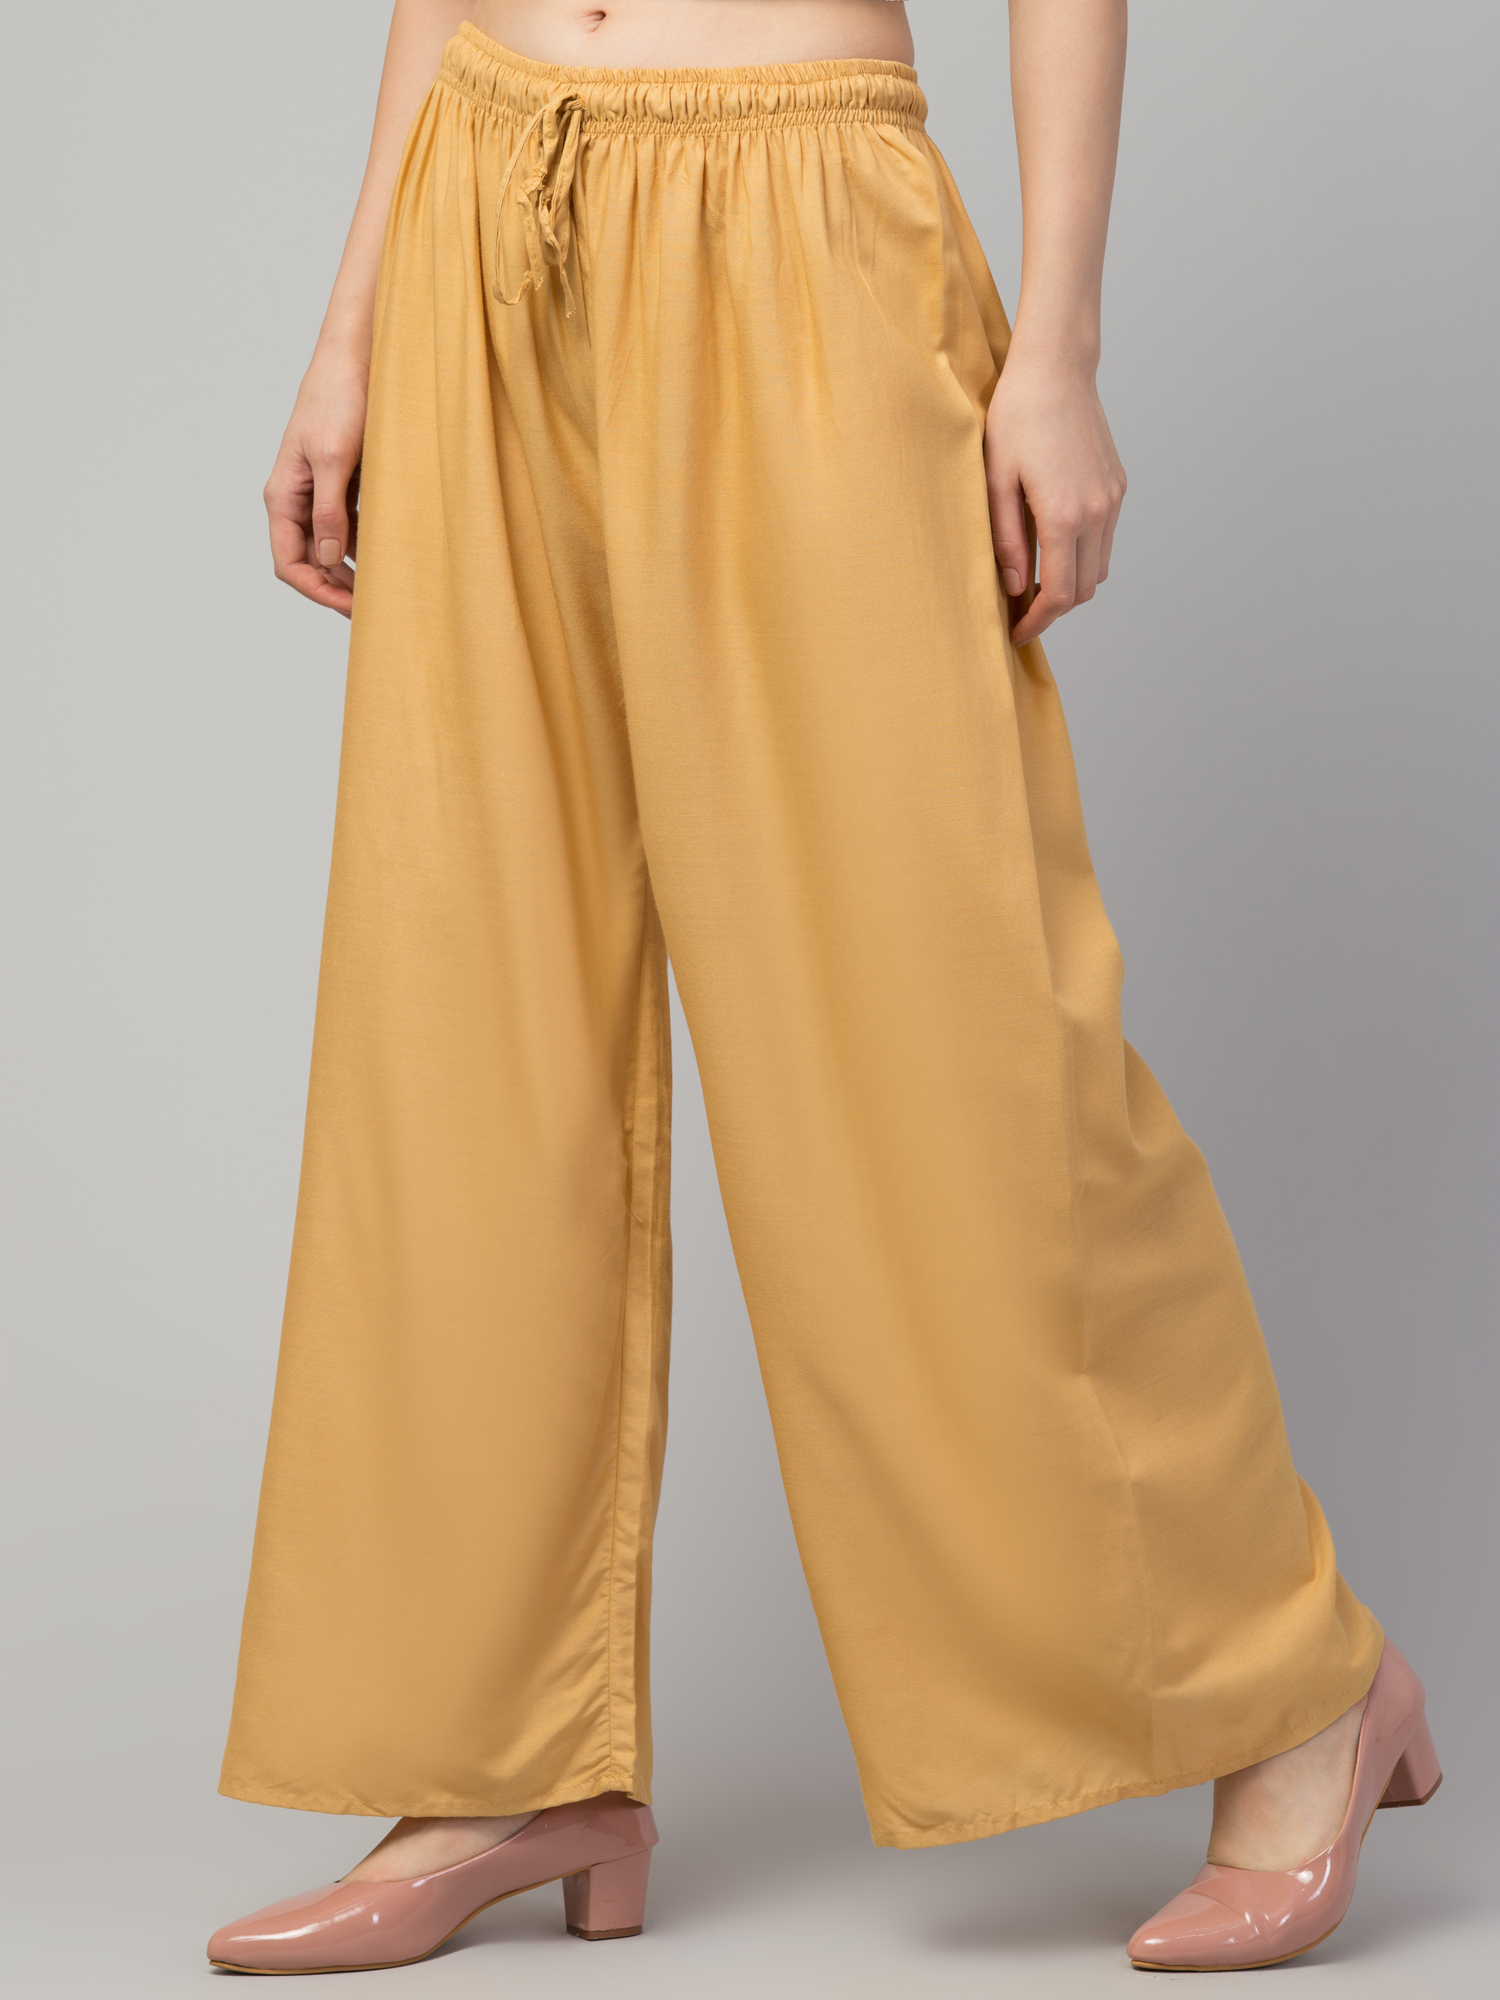 & Other Stories tailored pants in mustard - part of a set | ASOS